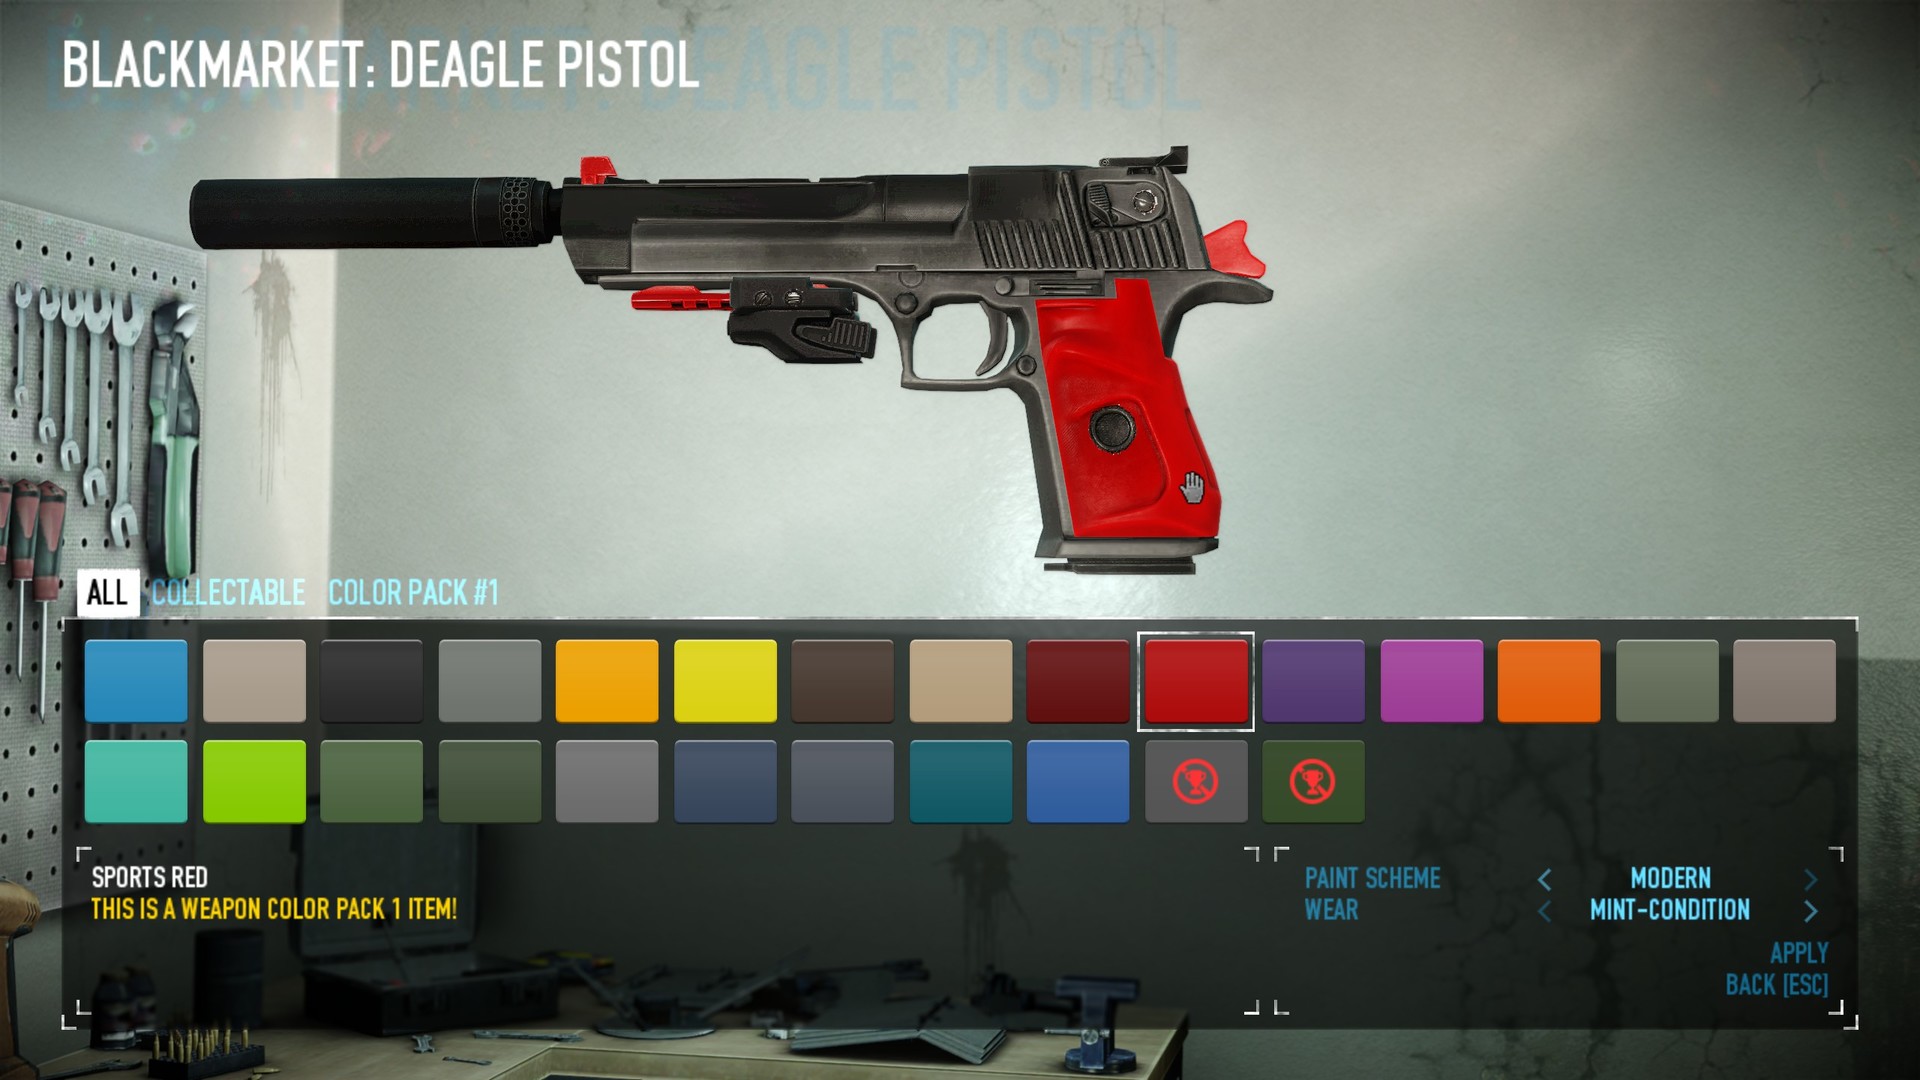 PAYDAY 2: Weapon Color Pack 1 Featured Screenshot #1